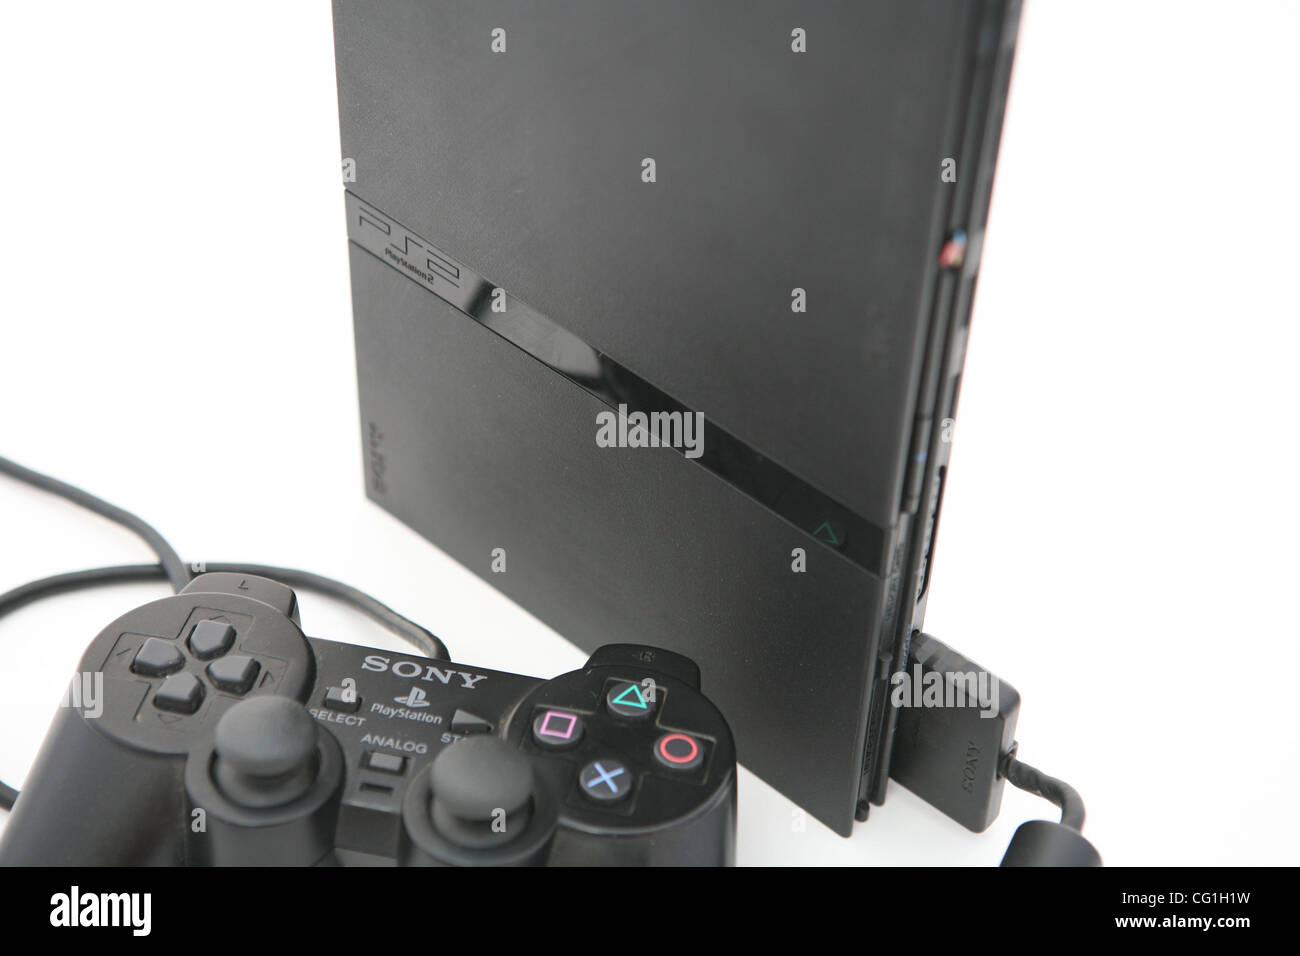 Aug 15, 2007 - Sydney, Australia - The Sony Playstation 2 is not dead. Game  developers are still announcing title for this ancient gaming console.  Unlike its currently available console cousins, the